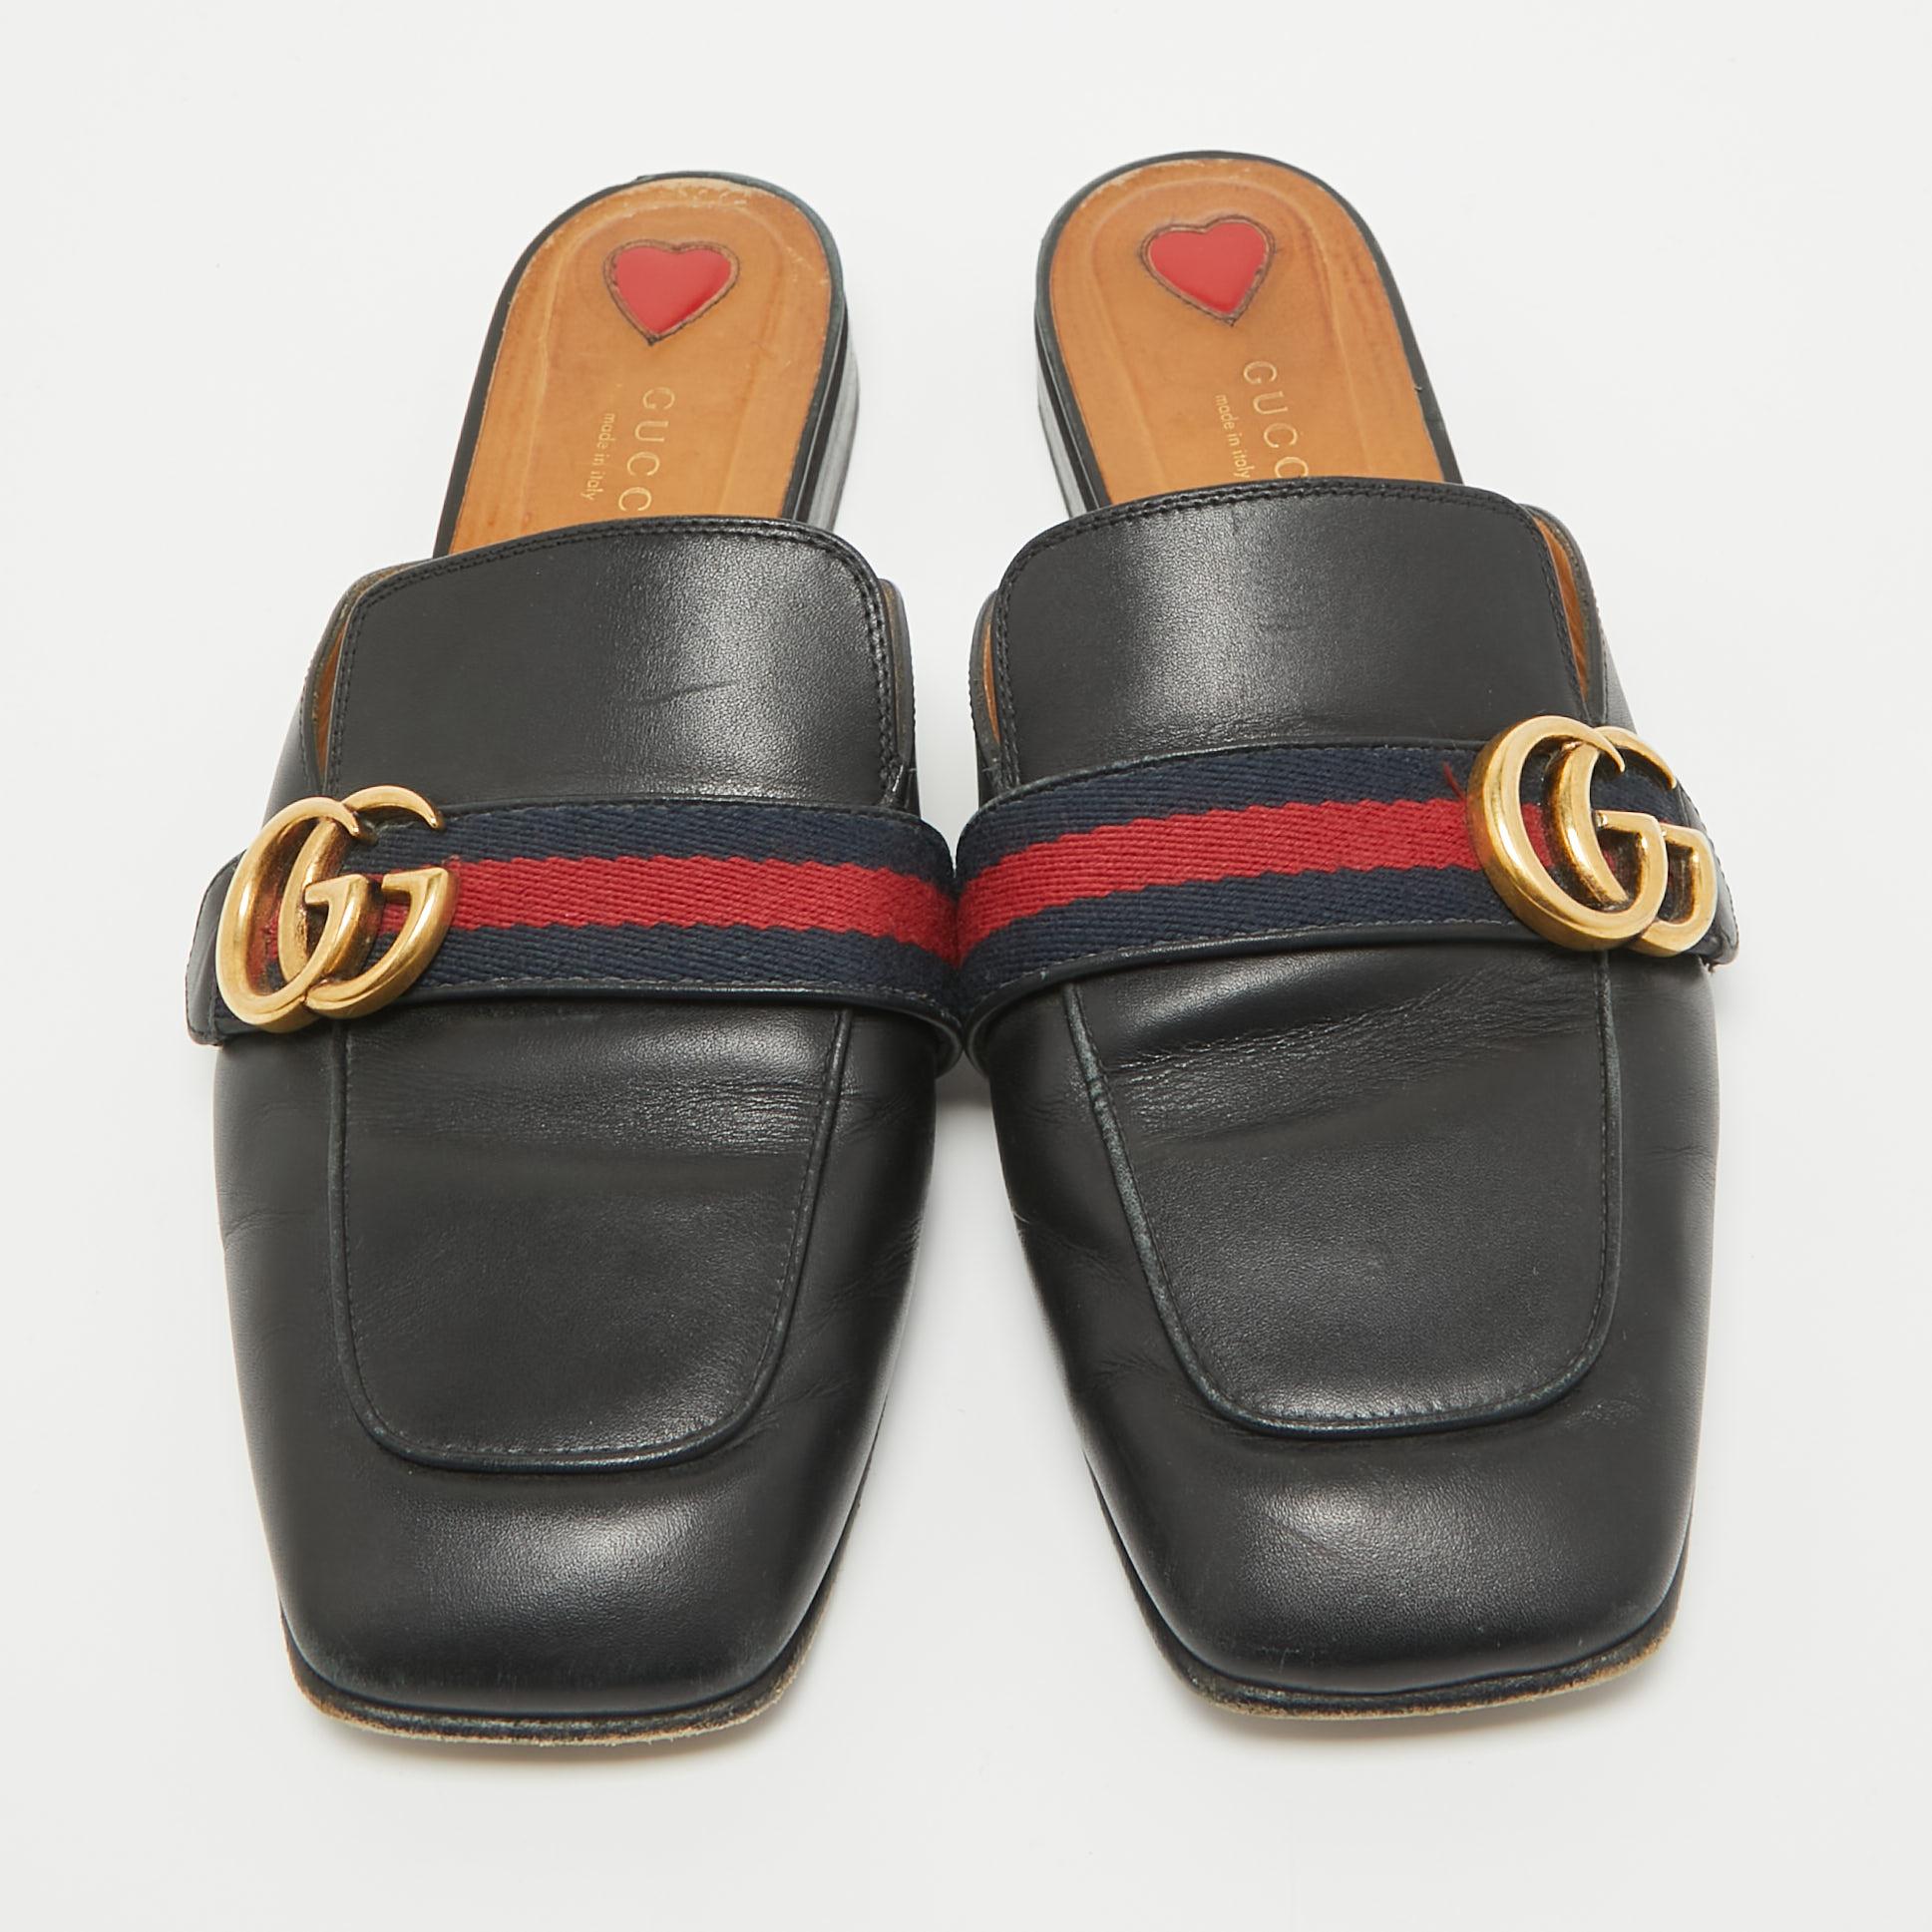 These Gucci Peyton flat mules are easy to style, comfortable, and versatile. Constructed in black leather, this stunning pair of shoes feature covered toes along with the signature Web detailing and GG logo on the uppers.

Includes: Original Box

